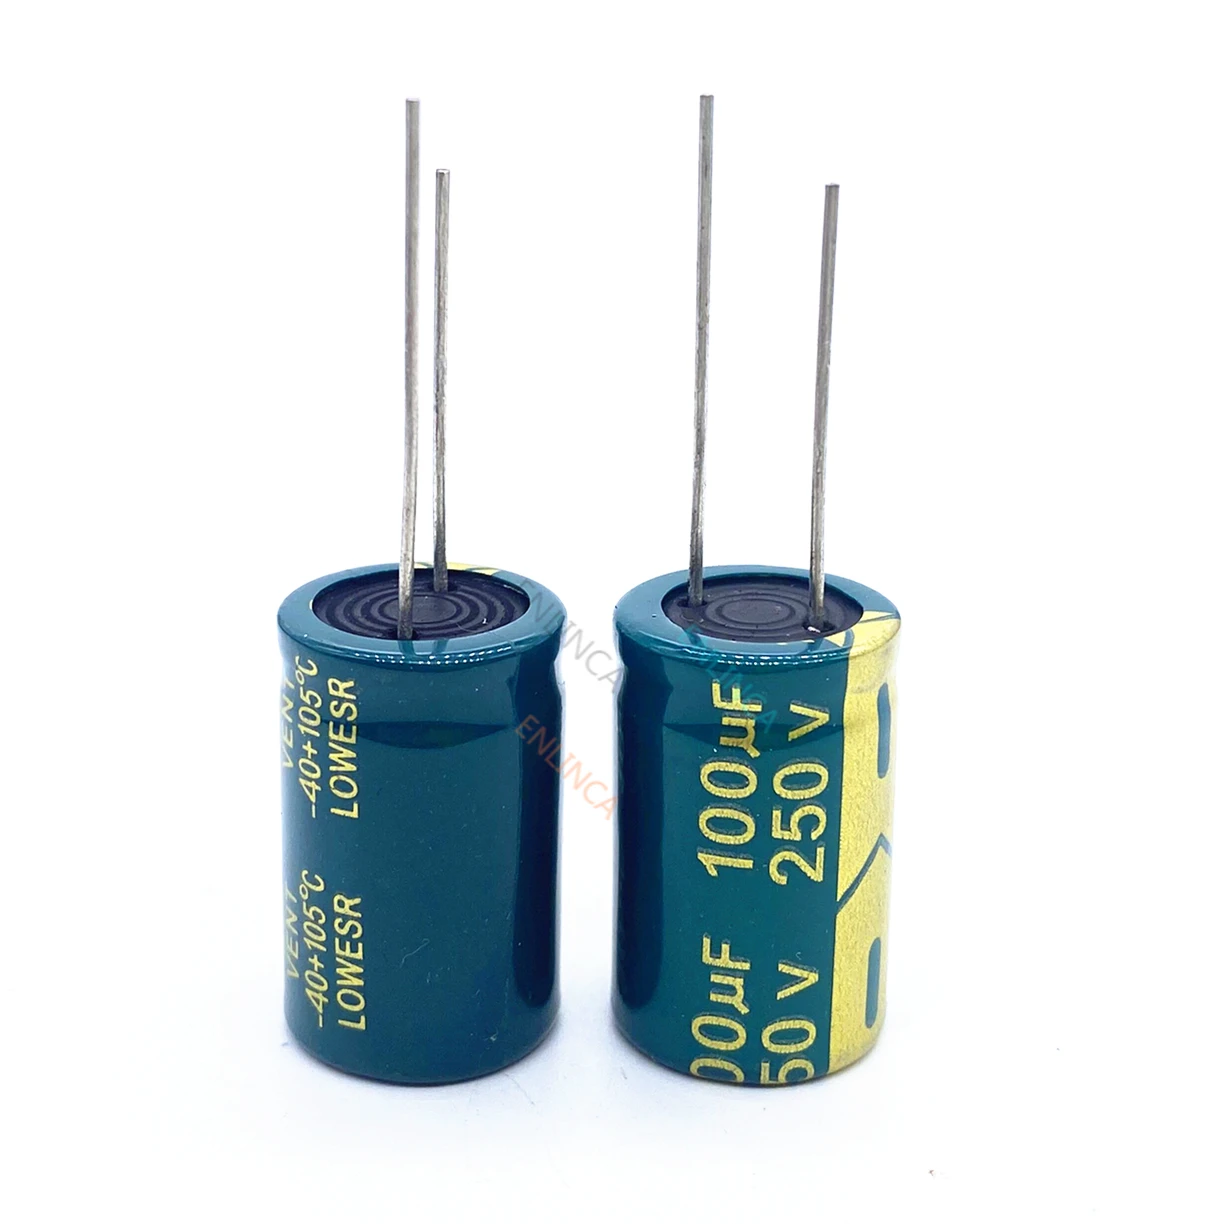 

60pcs/lot high frequency low impedance 250v 100UF 250v 100UF aluminum electrolytic capacitor size 16*25 20%